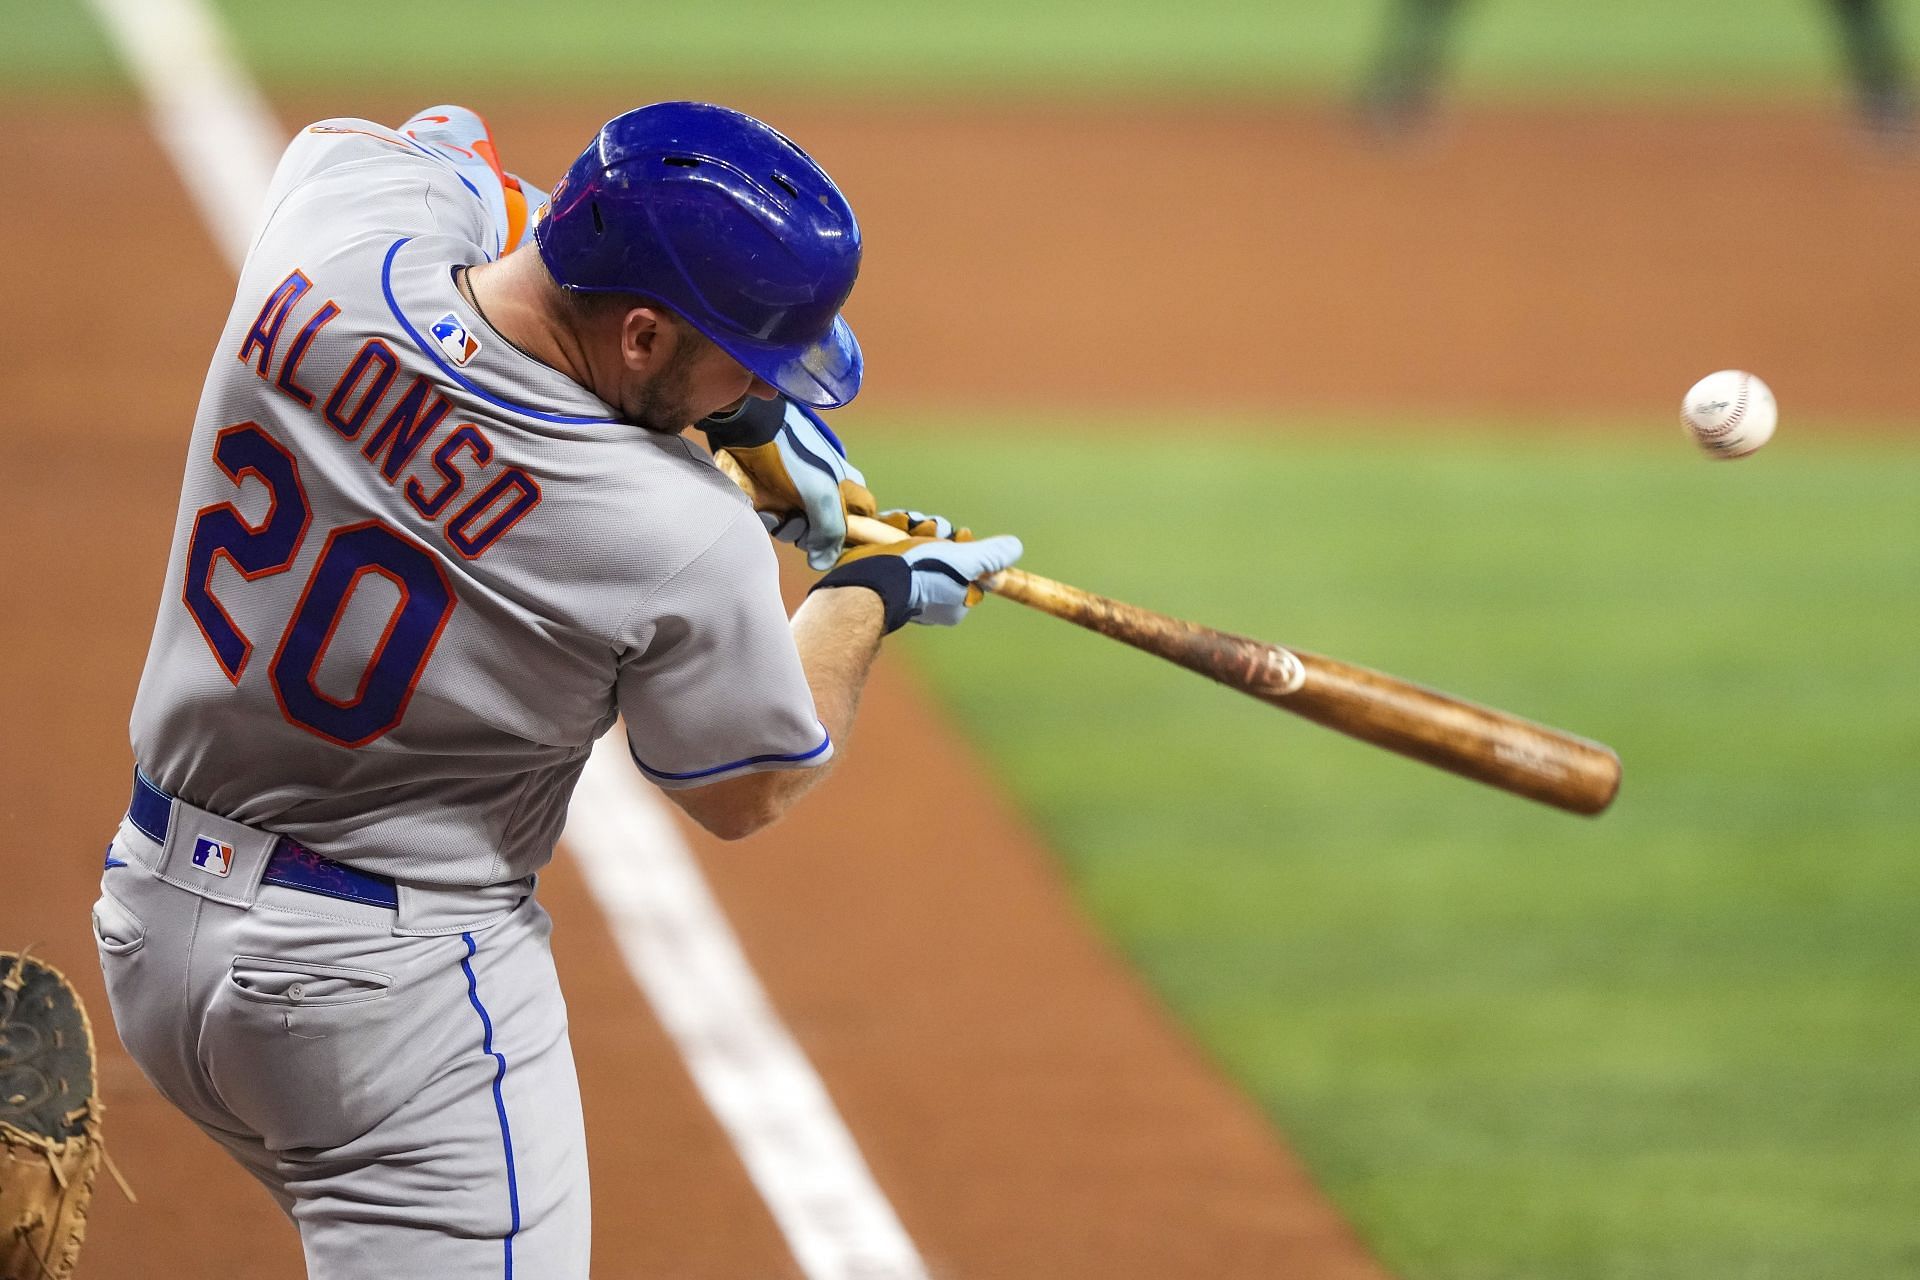 Pete Alonso is first on the Mets and second in the NL with 22 home runs.